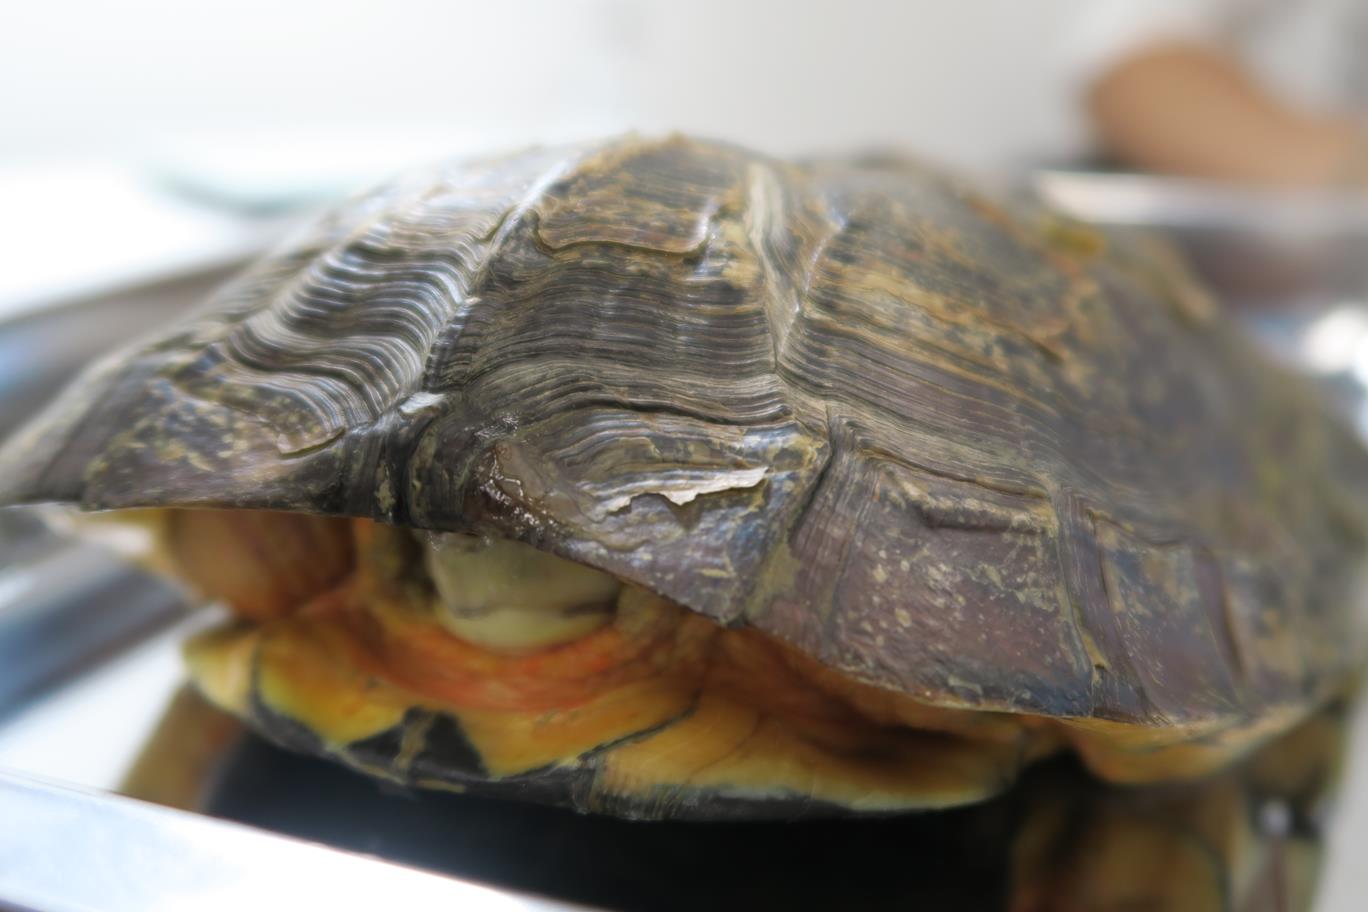 siubo the turtle recovered